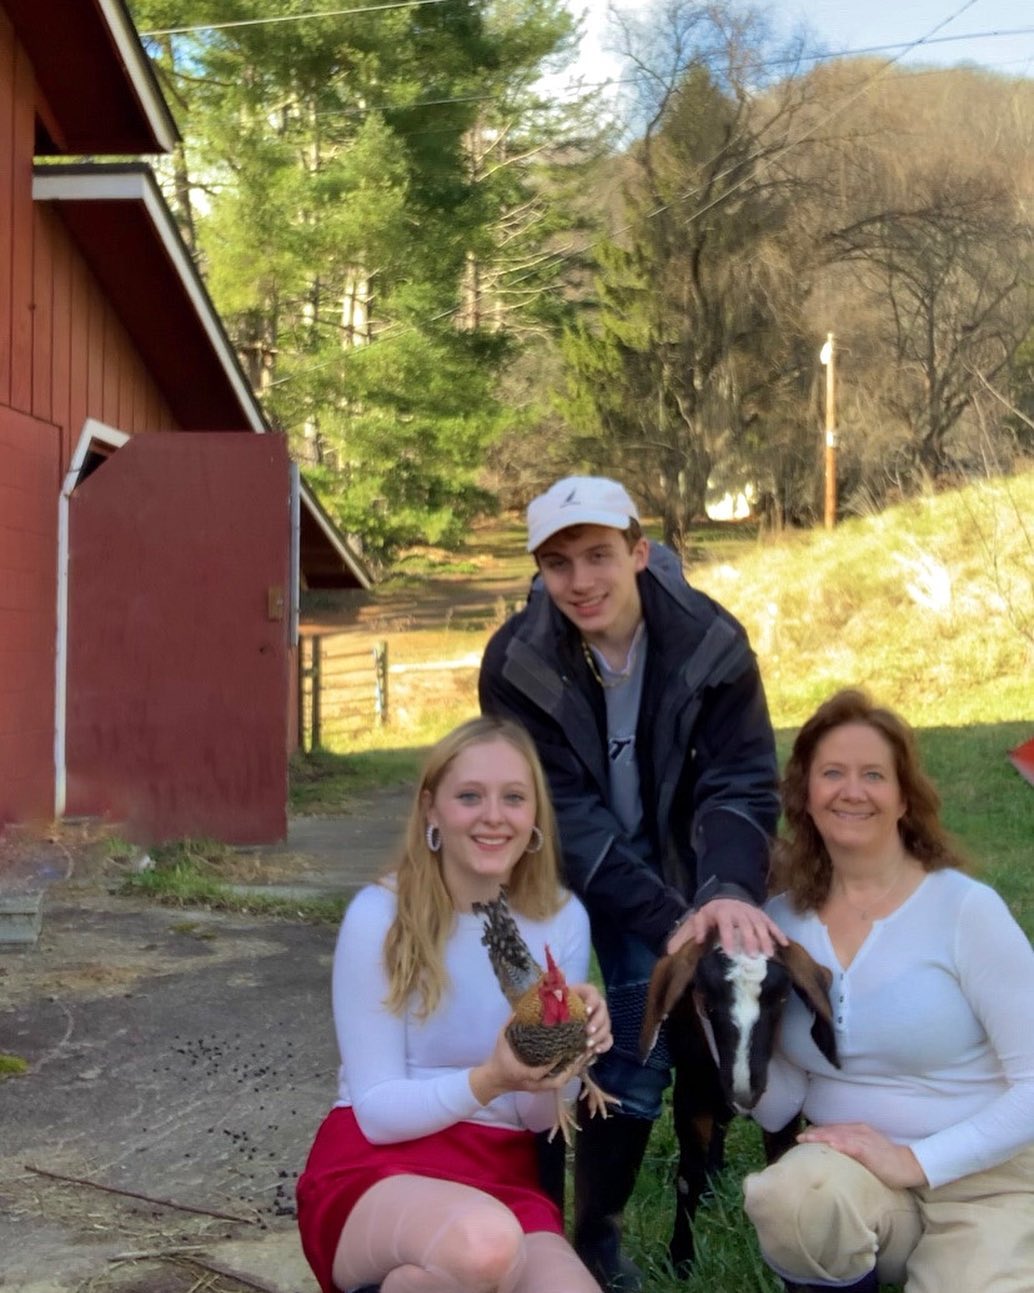 Alexa, a guy named Nick, Sharon, Chester the chicken, and Stella goat posing together for a photo at Friendly Fields Farm. A red building is just in the distance behind them.